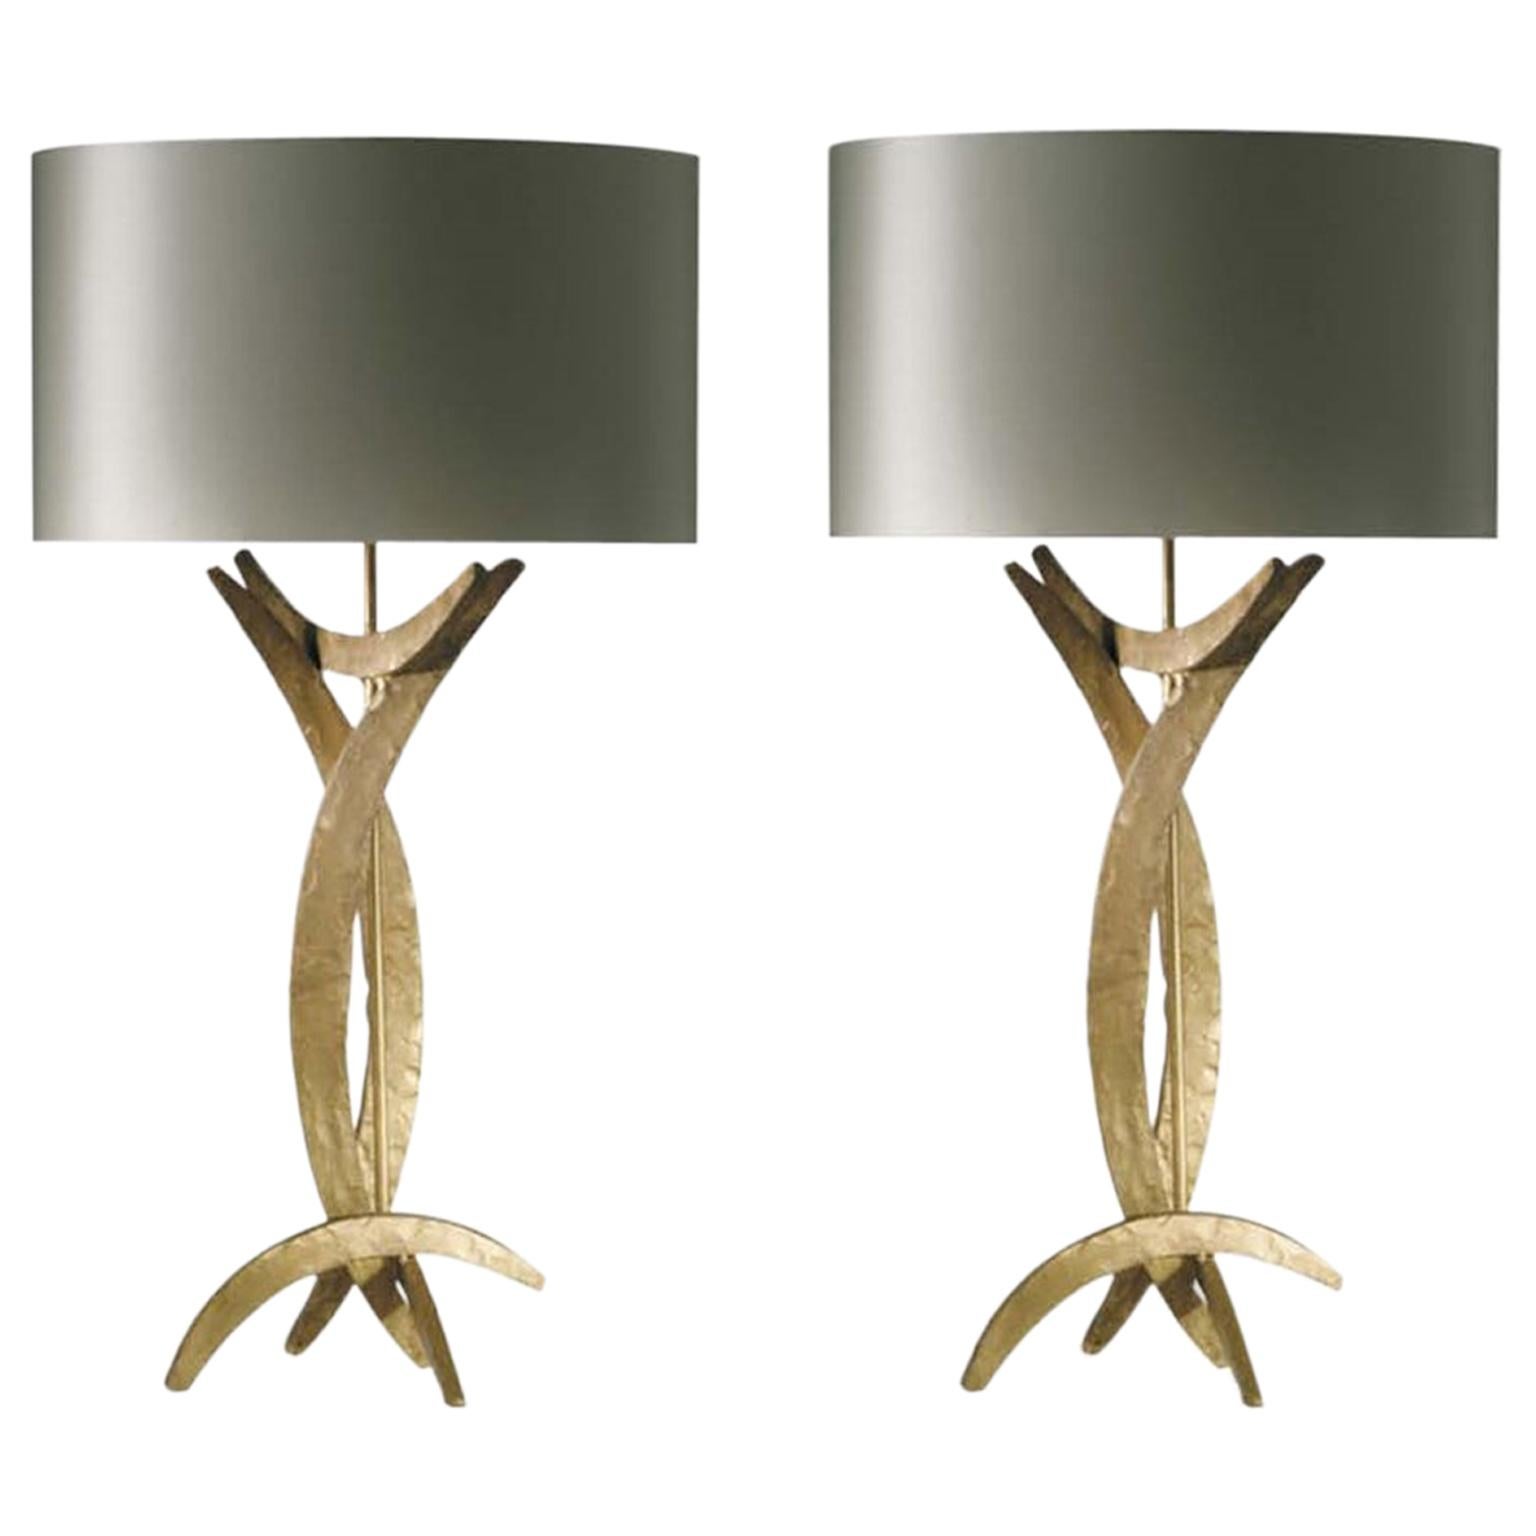 Forged Steel in Bright Gold Finish Table Lamps with Oval Silk Lamp Shades, Pair